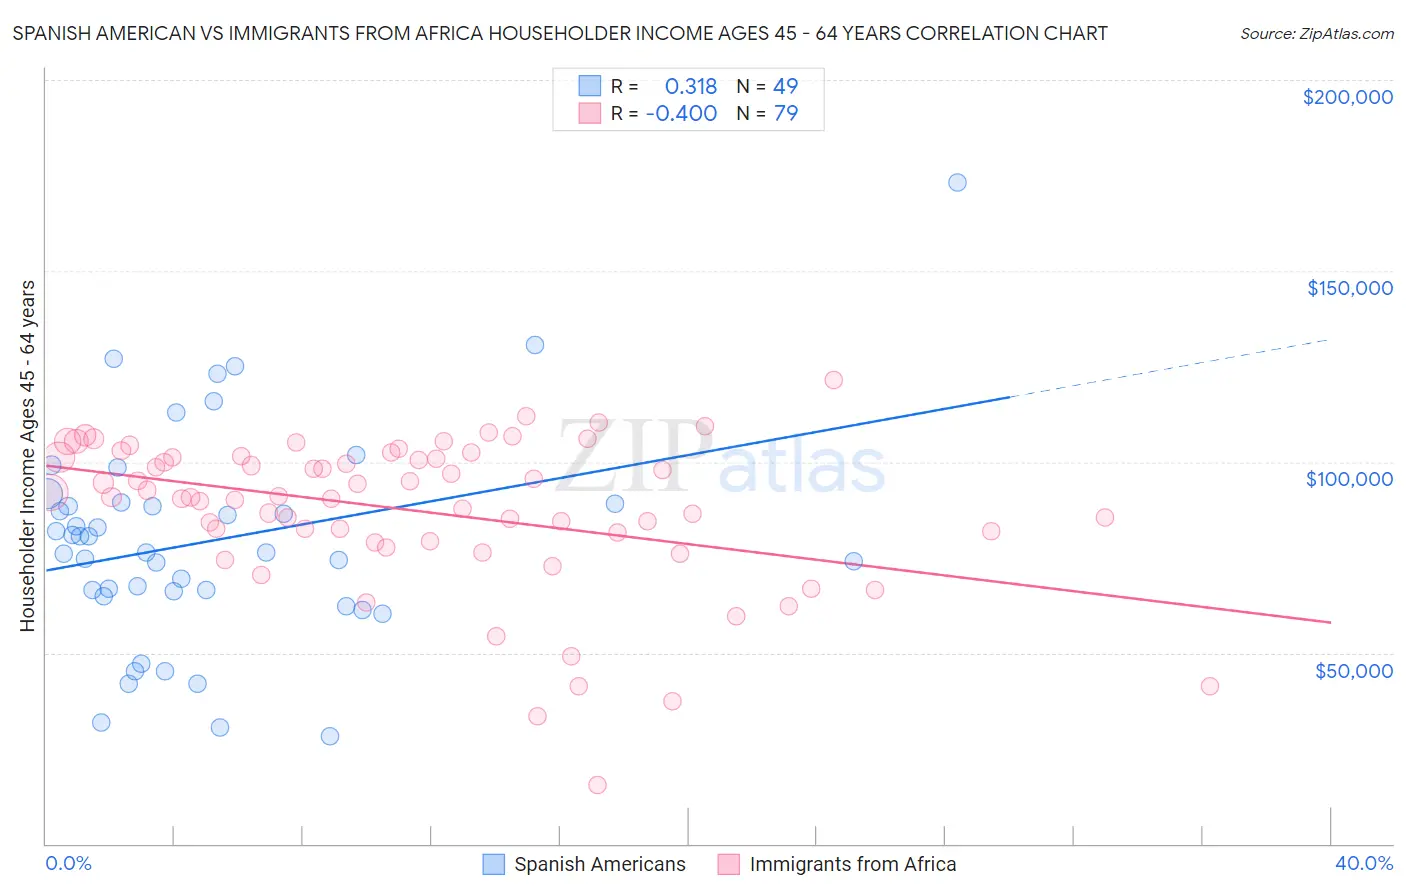 Spanish American vs Immigrants from Africa Householder Income Ages 45 - 64 years